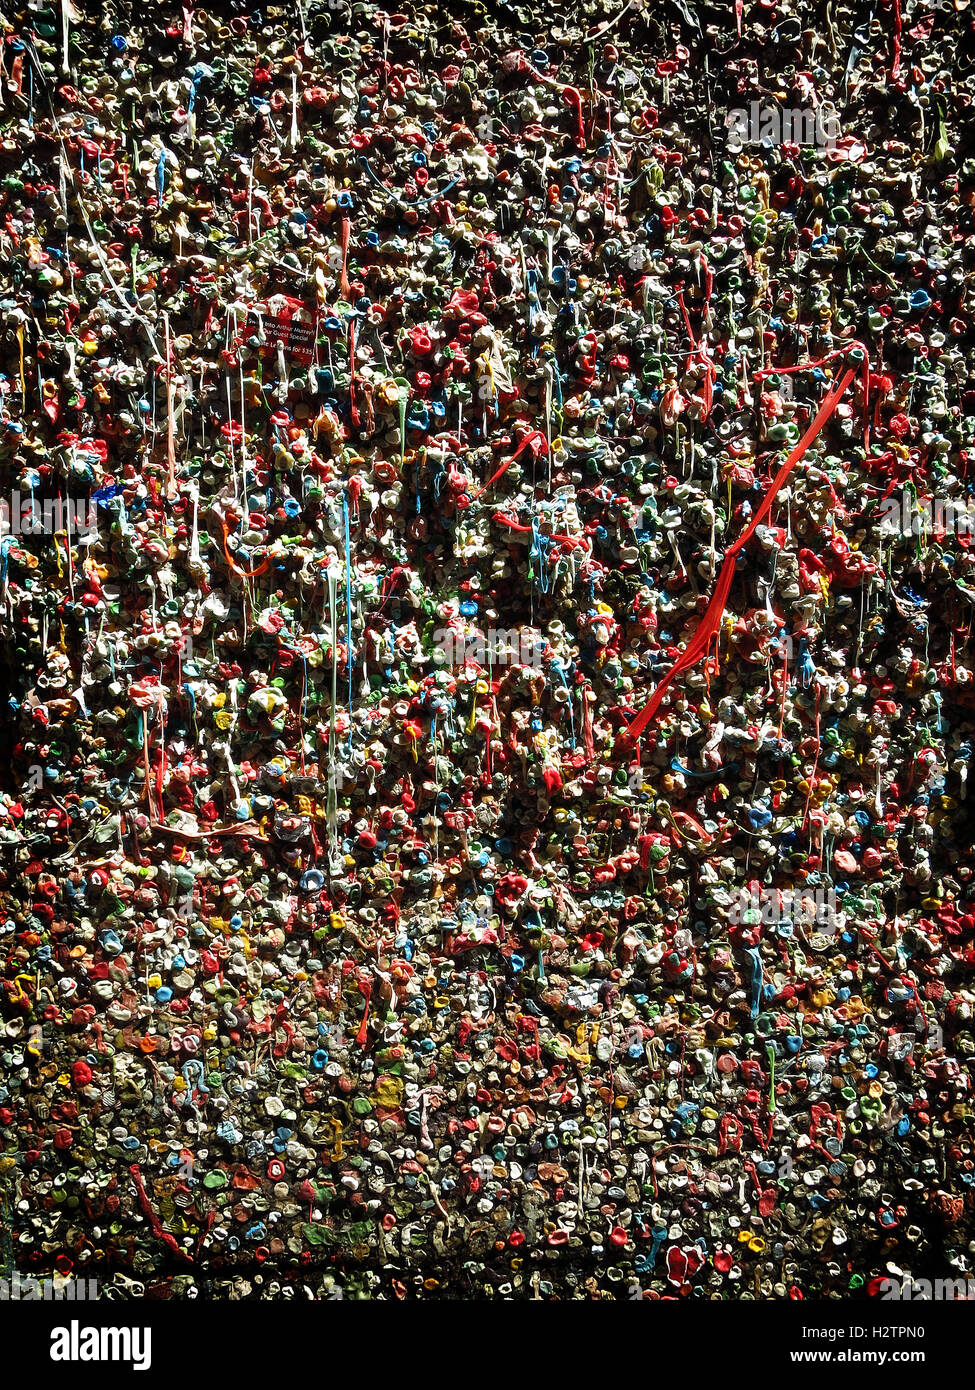 Detail of Gum Wall near Pikes Place Market in Seattle Washington USA Stock Photo